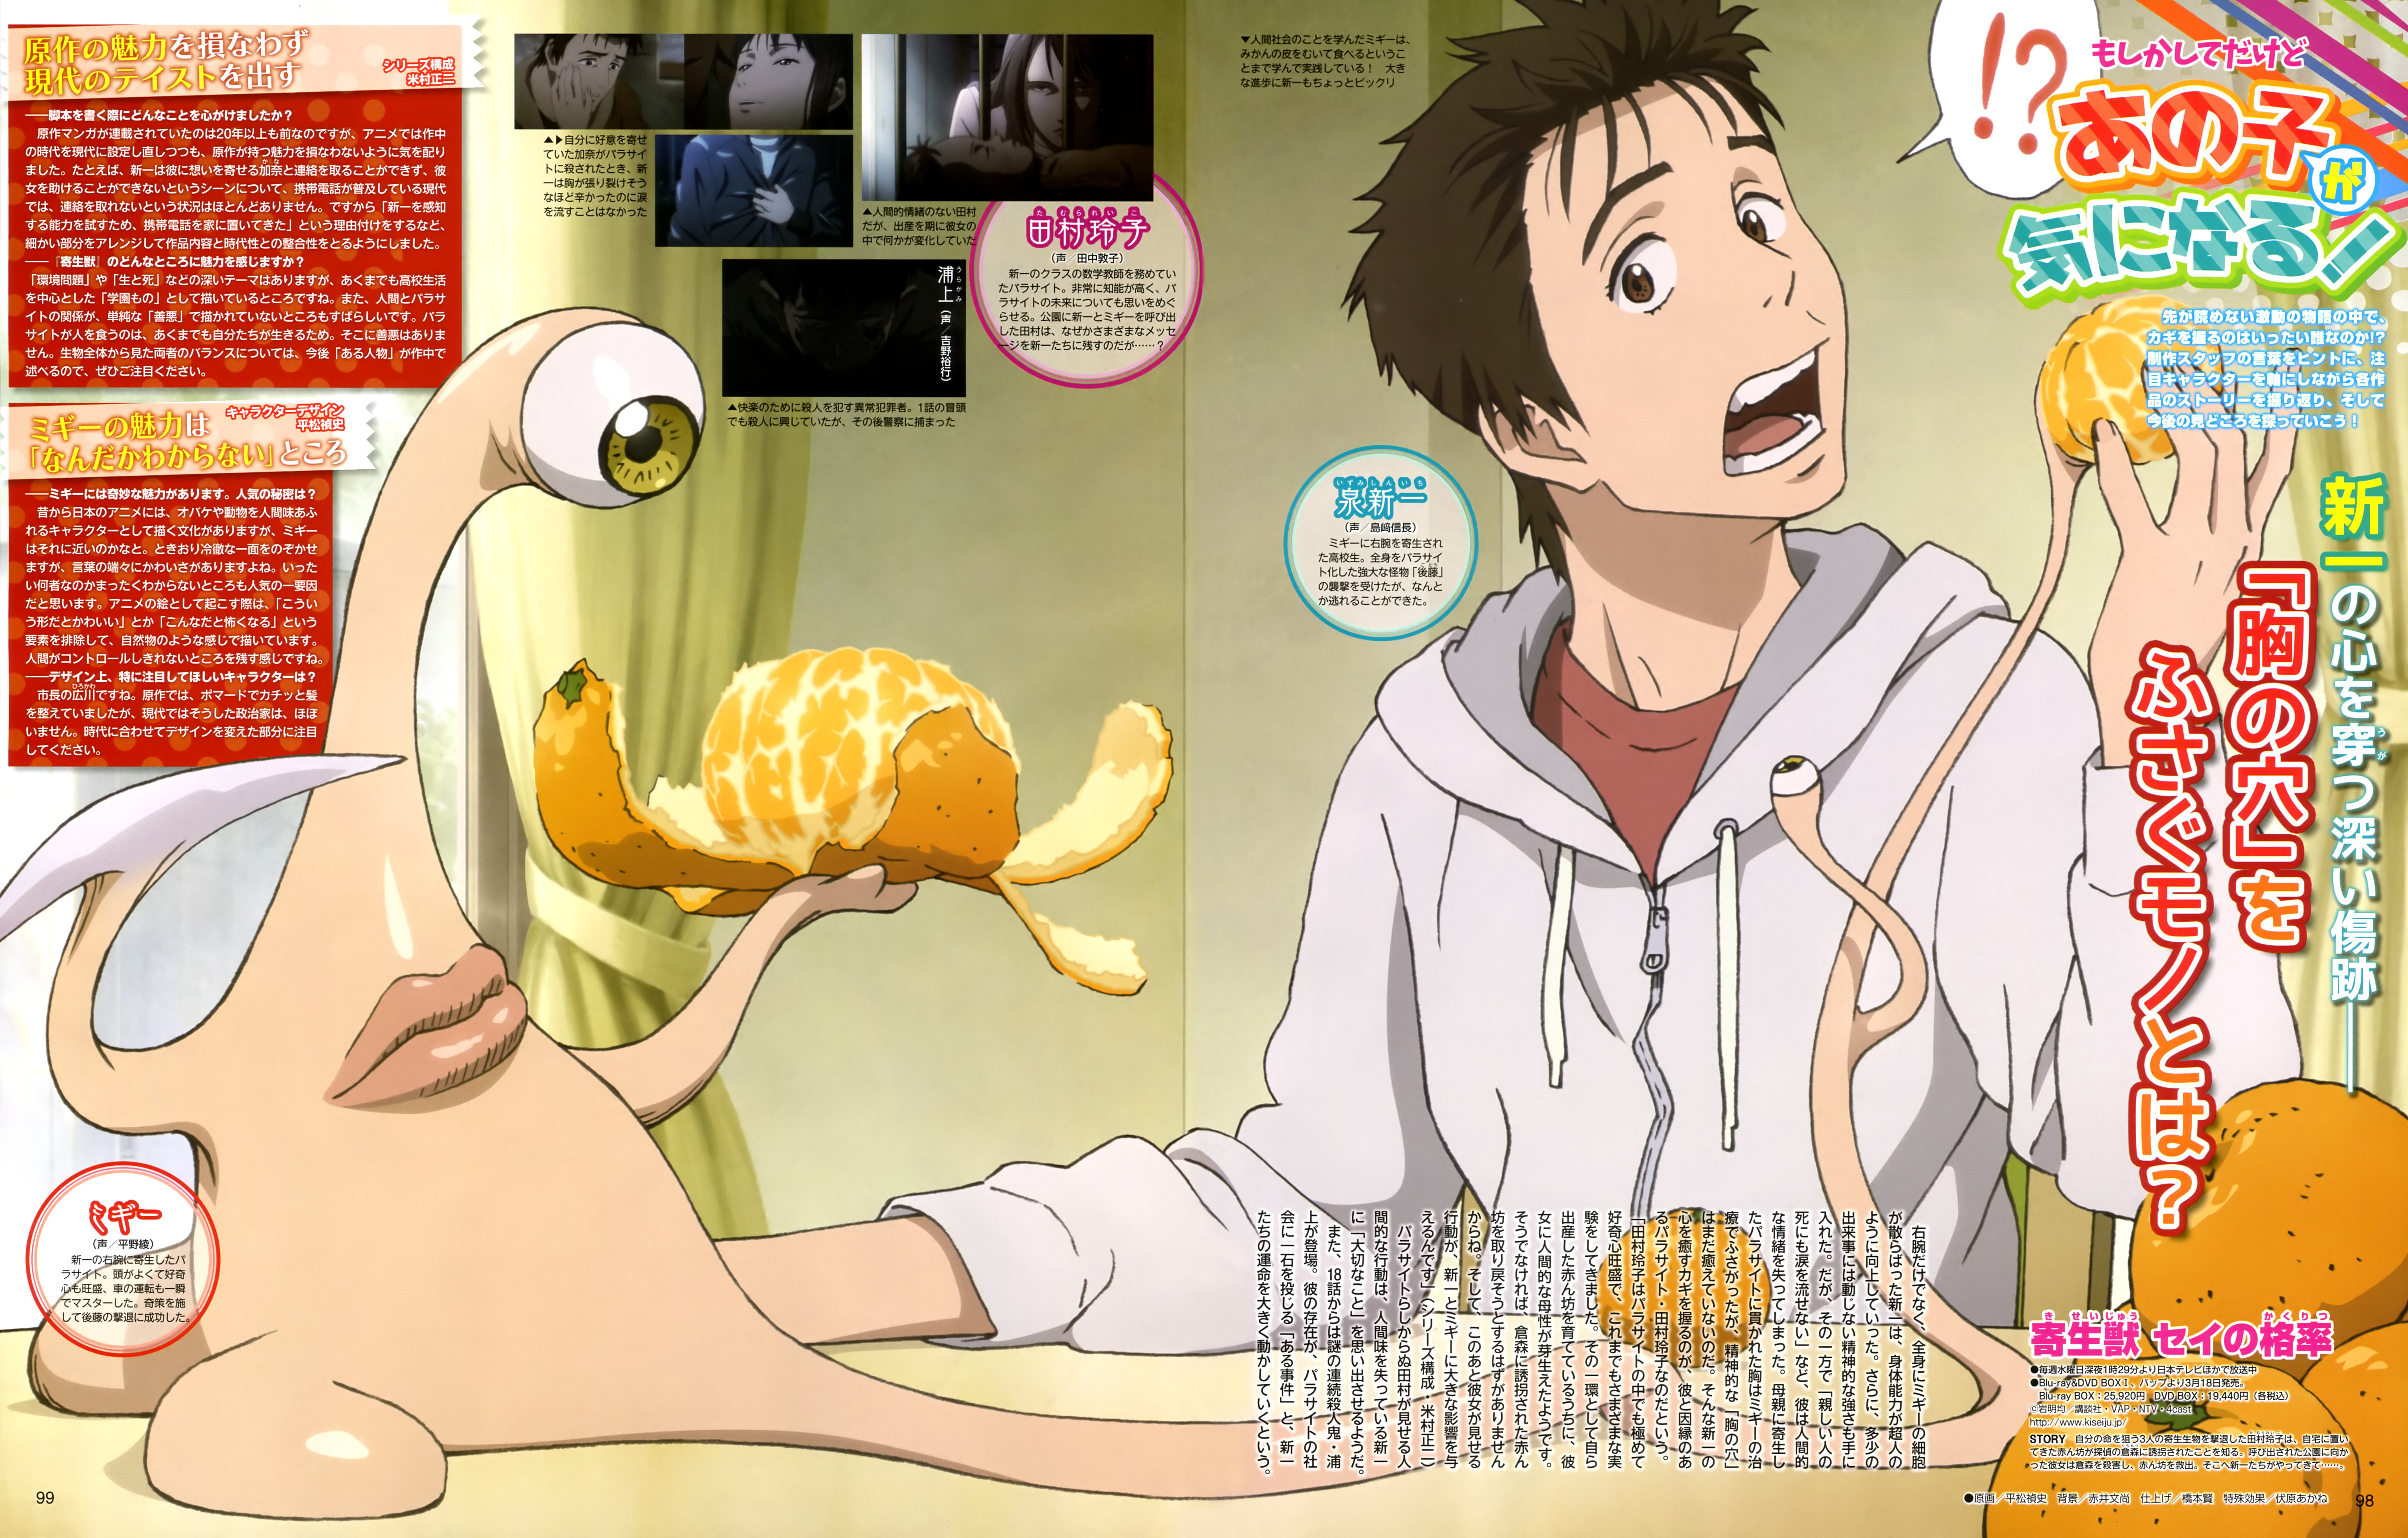 Top 10 Anime Series Streamed from NewType’s May 2015 Issue Parasyte